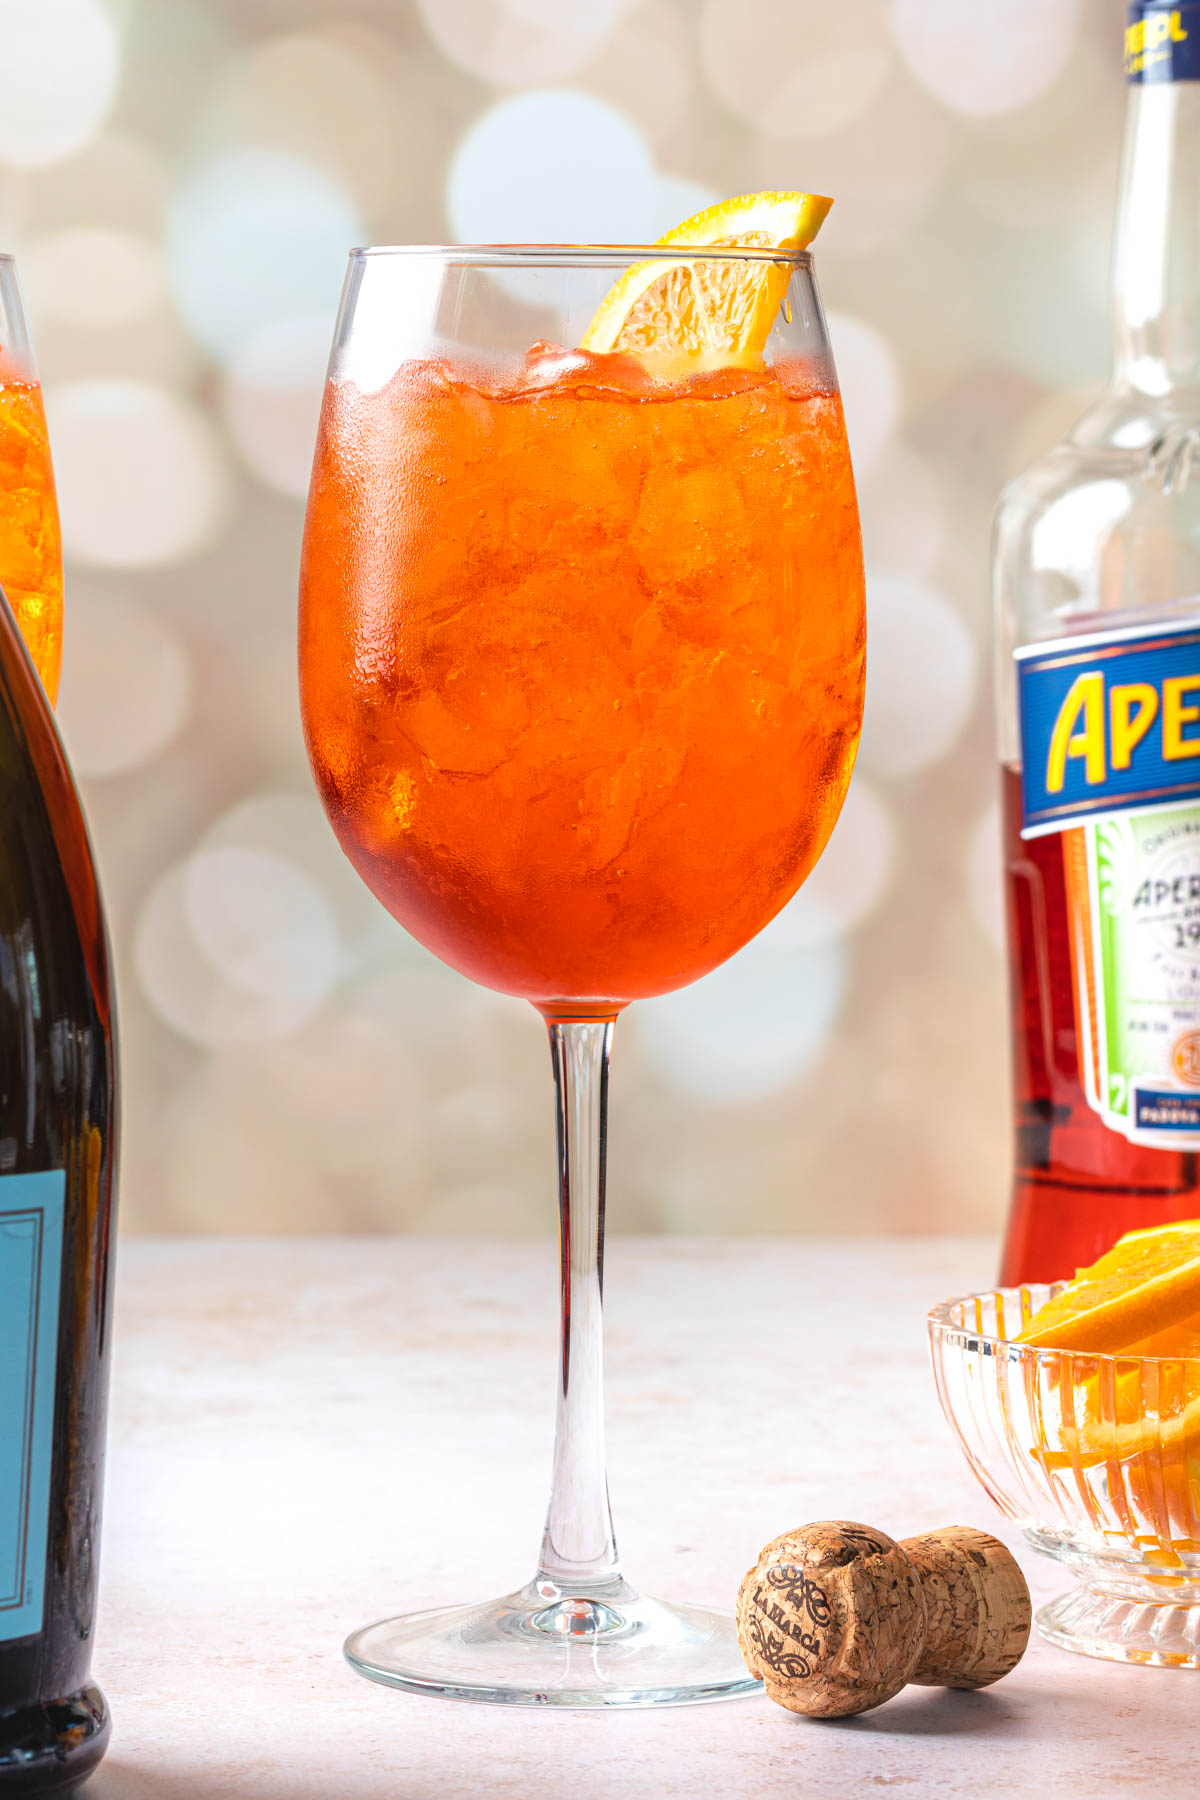 A bottle of prosecco, an aperol spritz in a wine glass with an orange wedge,  a bottle of aperol and a bowl of orange wedges. 